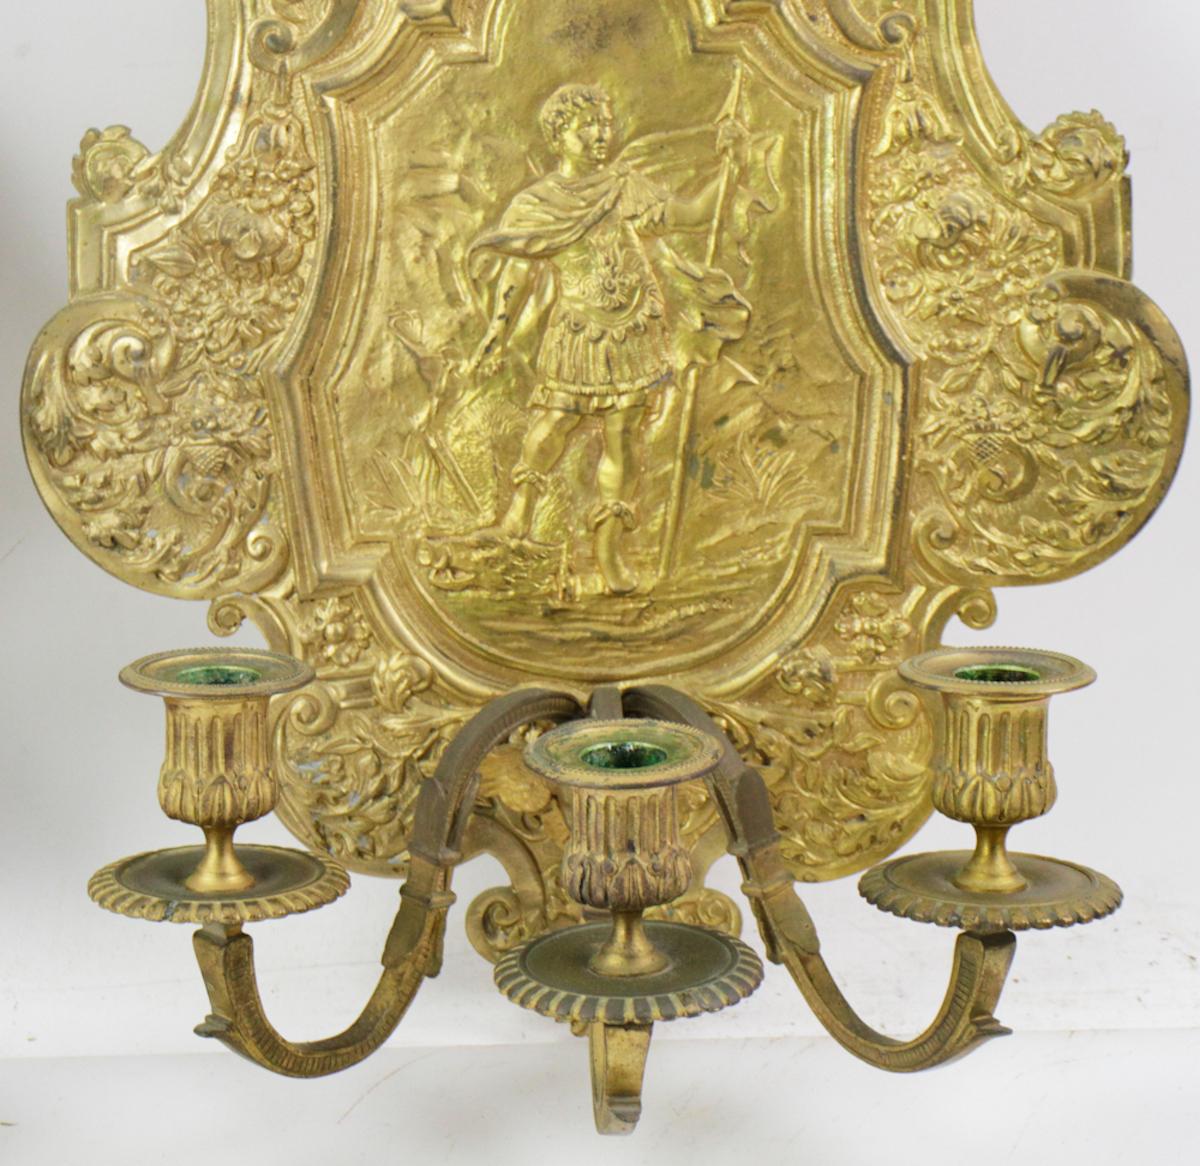  Pair of 19th century French Gilt Bronze Candle Sconces of Diana The Huntress For Sale 2